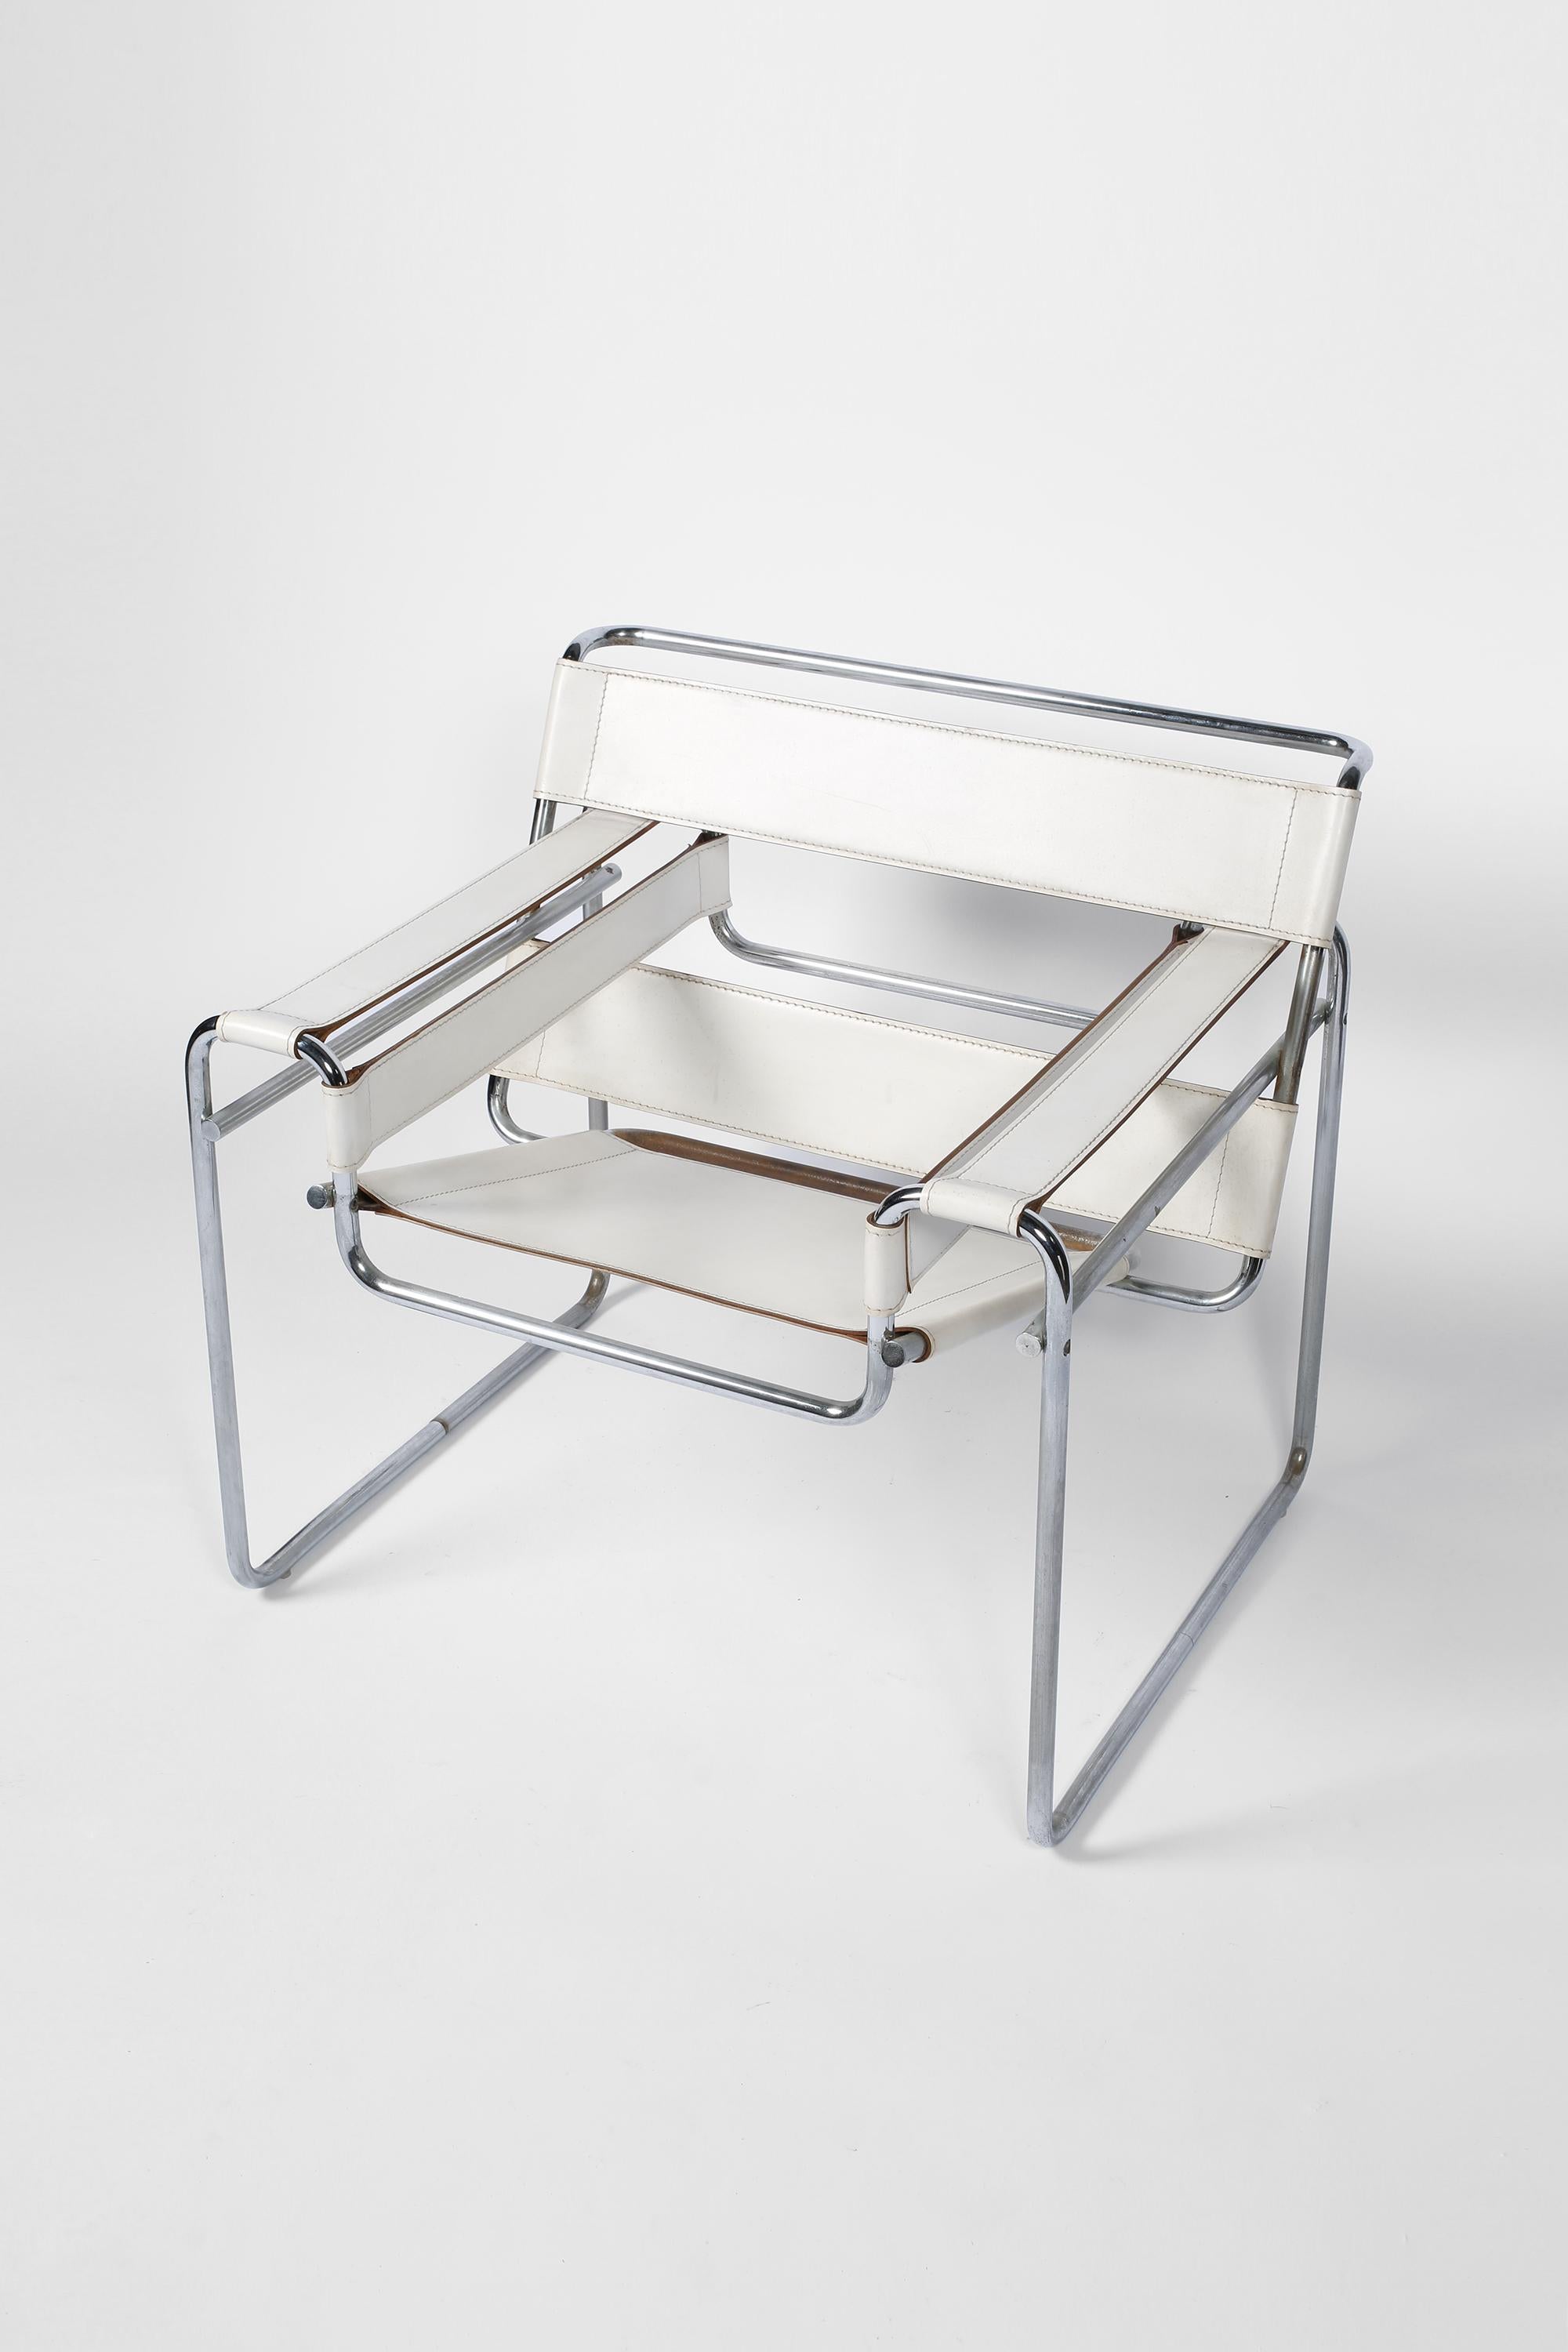 An iconic white leather Model B3 or ‘Wassily’ chair, first designed by Marcel Breuer in c. 1925. This later edition features solid welded ends to the tubular frame and dates to c. 1980 - likely produced by Cassina, Italy.

Note: Age commensurate